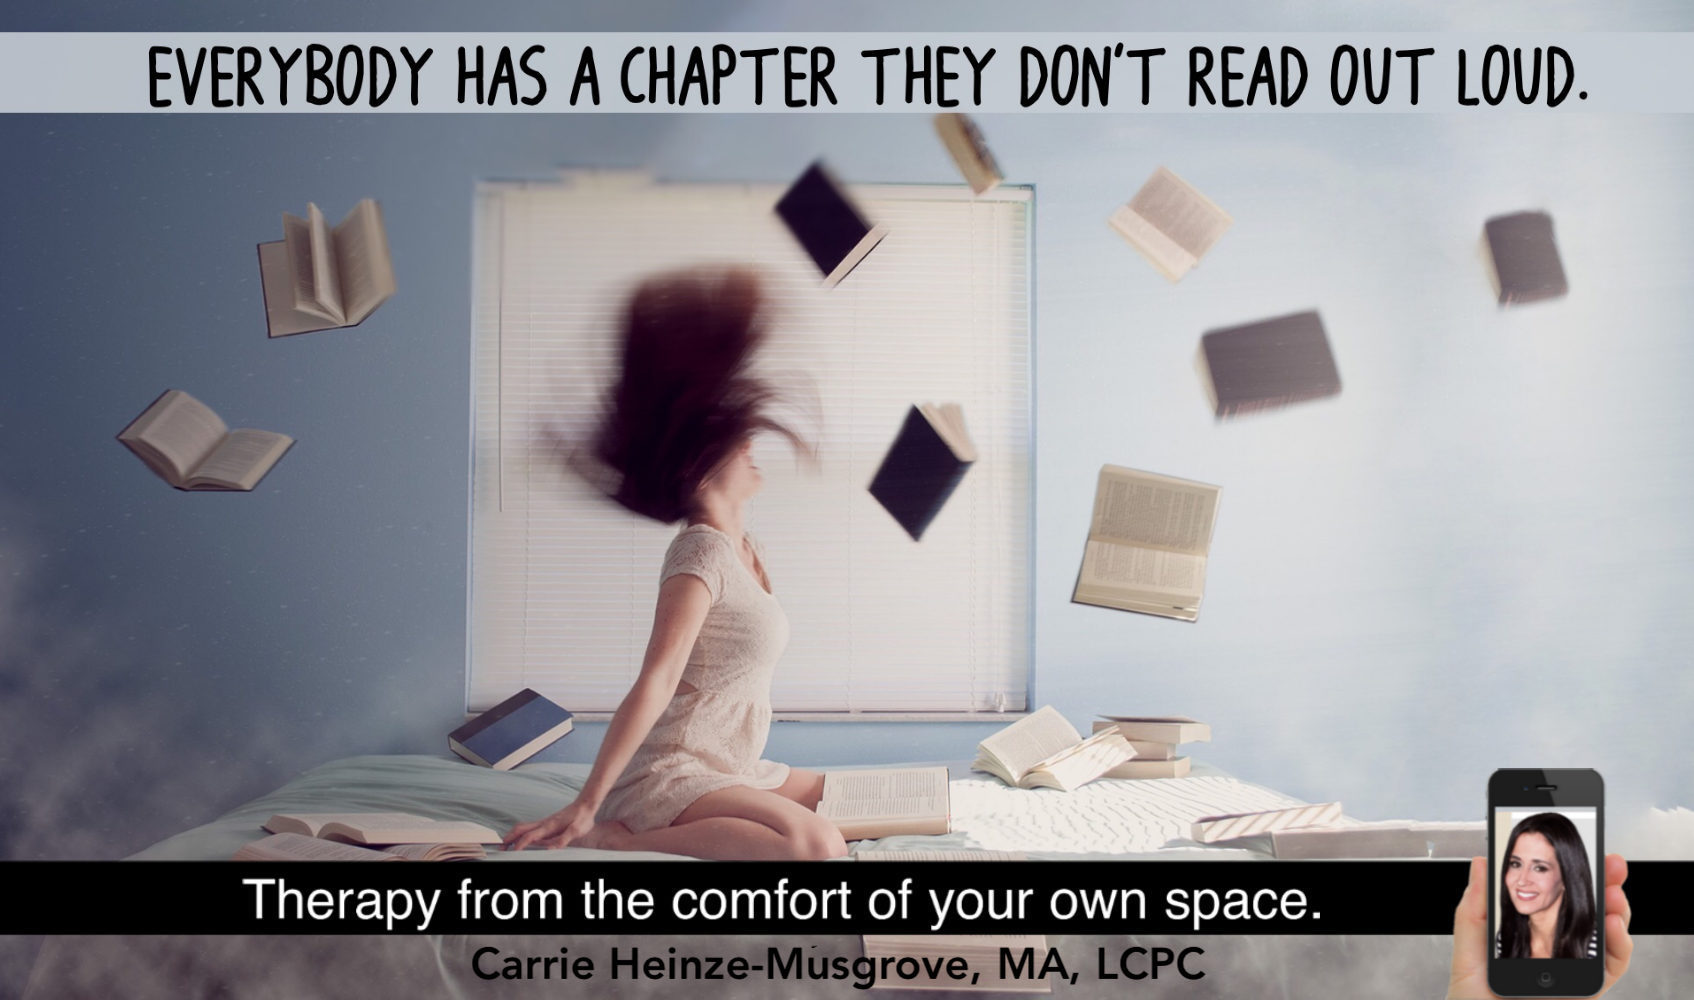 Everybody has a chapter they don’t read out loud.